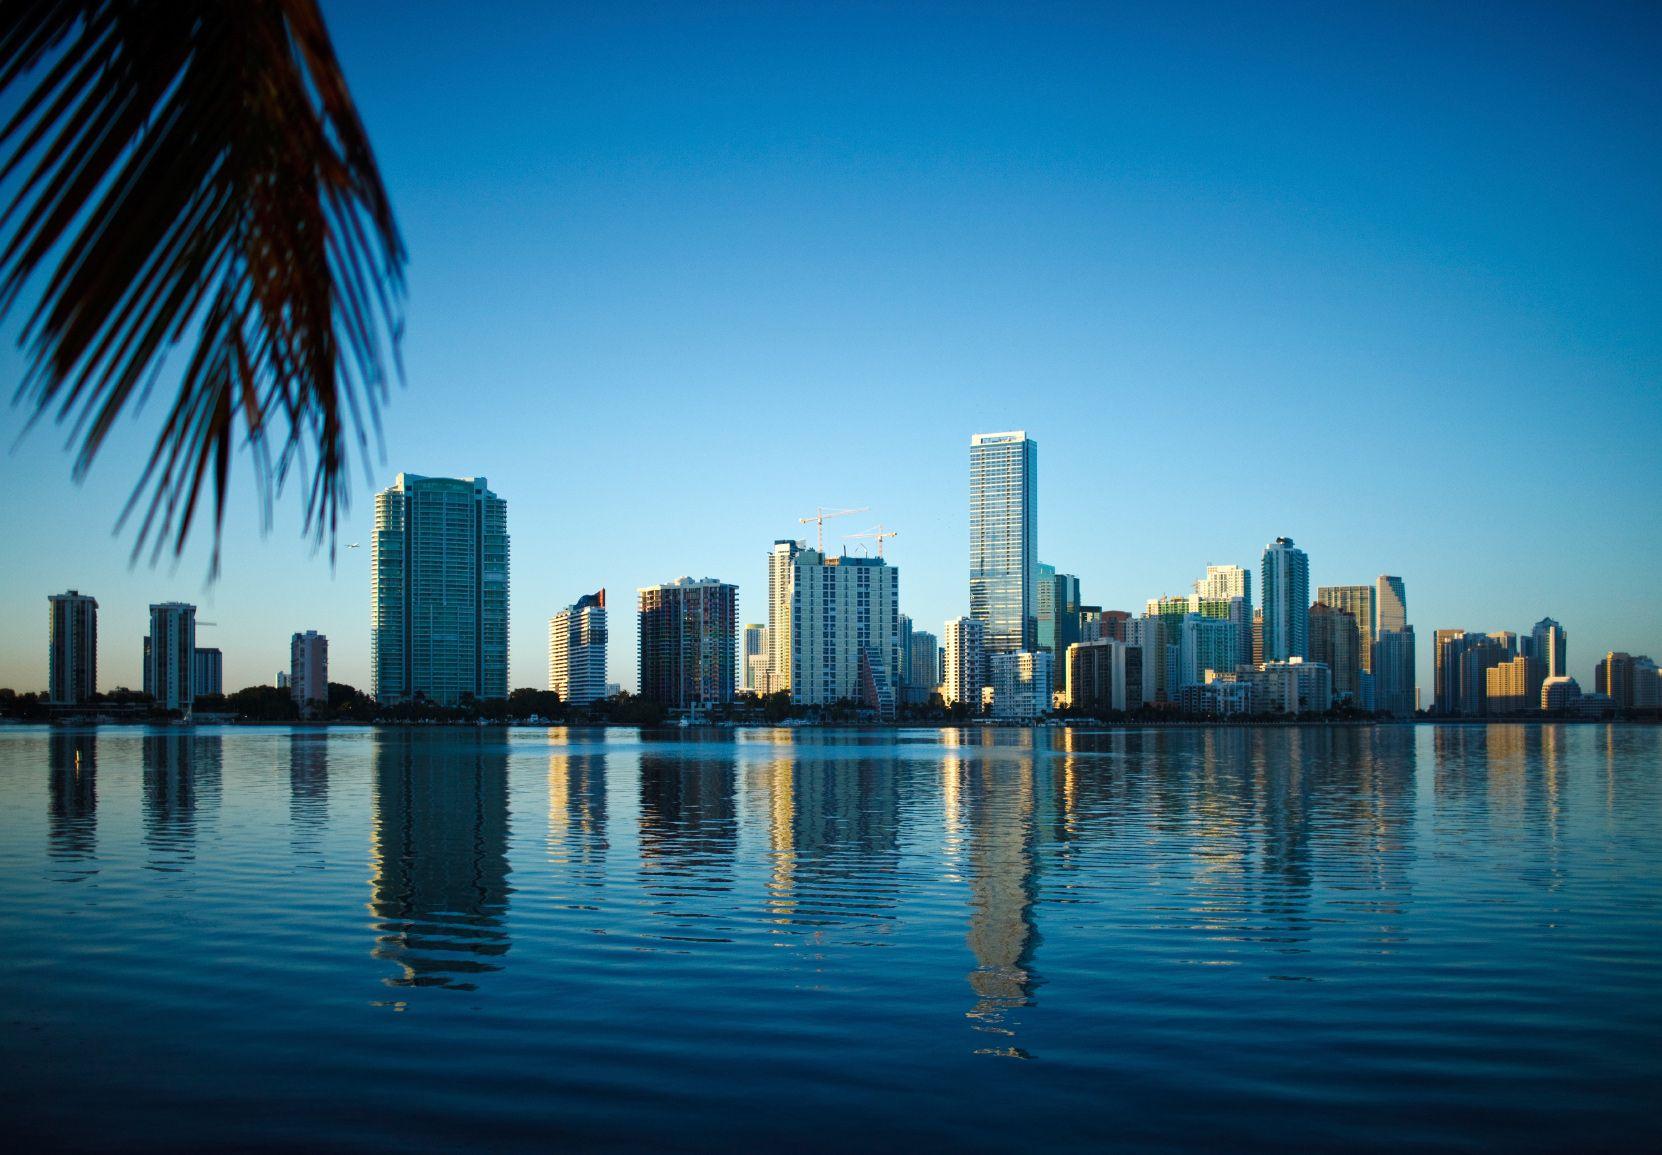 Feds To Eye Miami Cash Real Estate Transactions